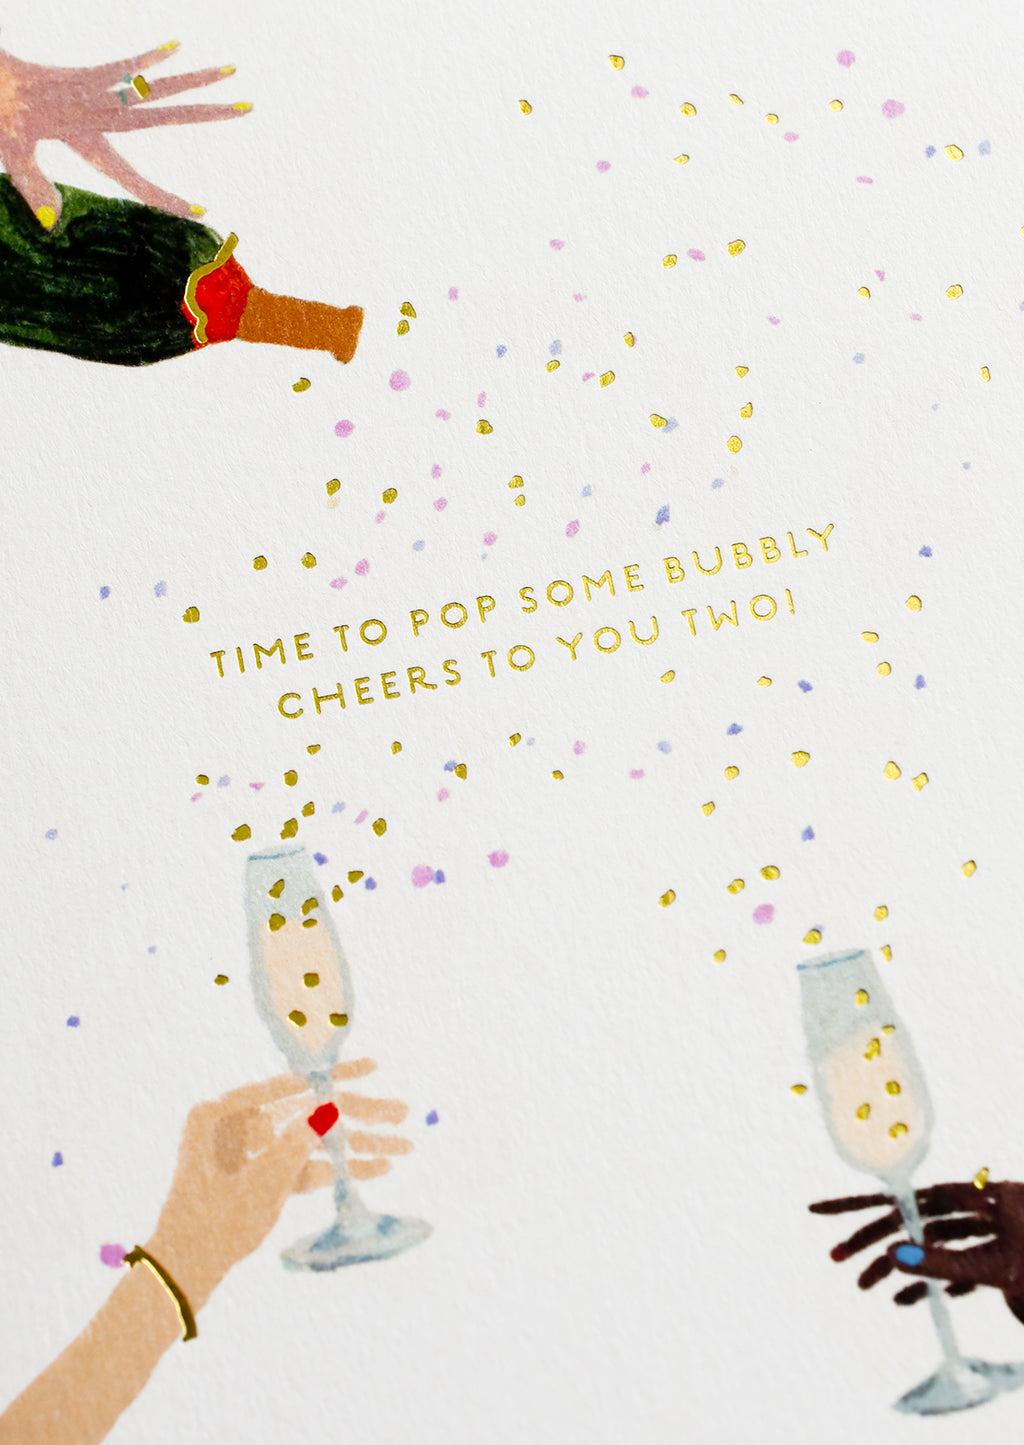 2: A greeting card with images of hands holding champagne glasses.